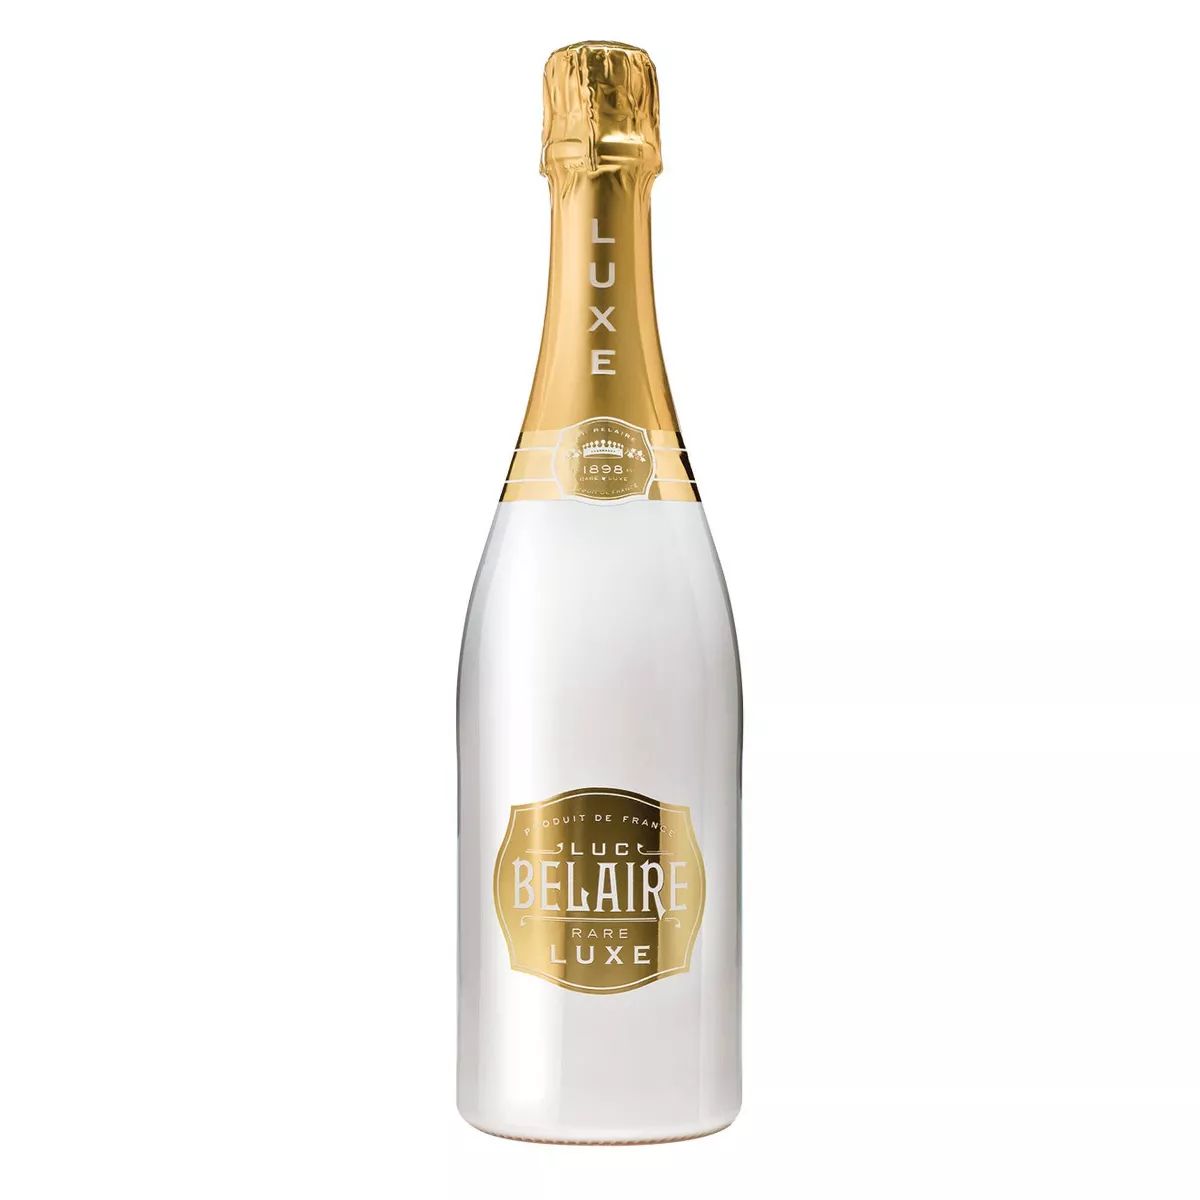 Luc Belaire Luxe Chardonnay White Wine - 750ml Bottle | Target